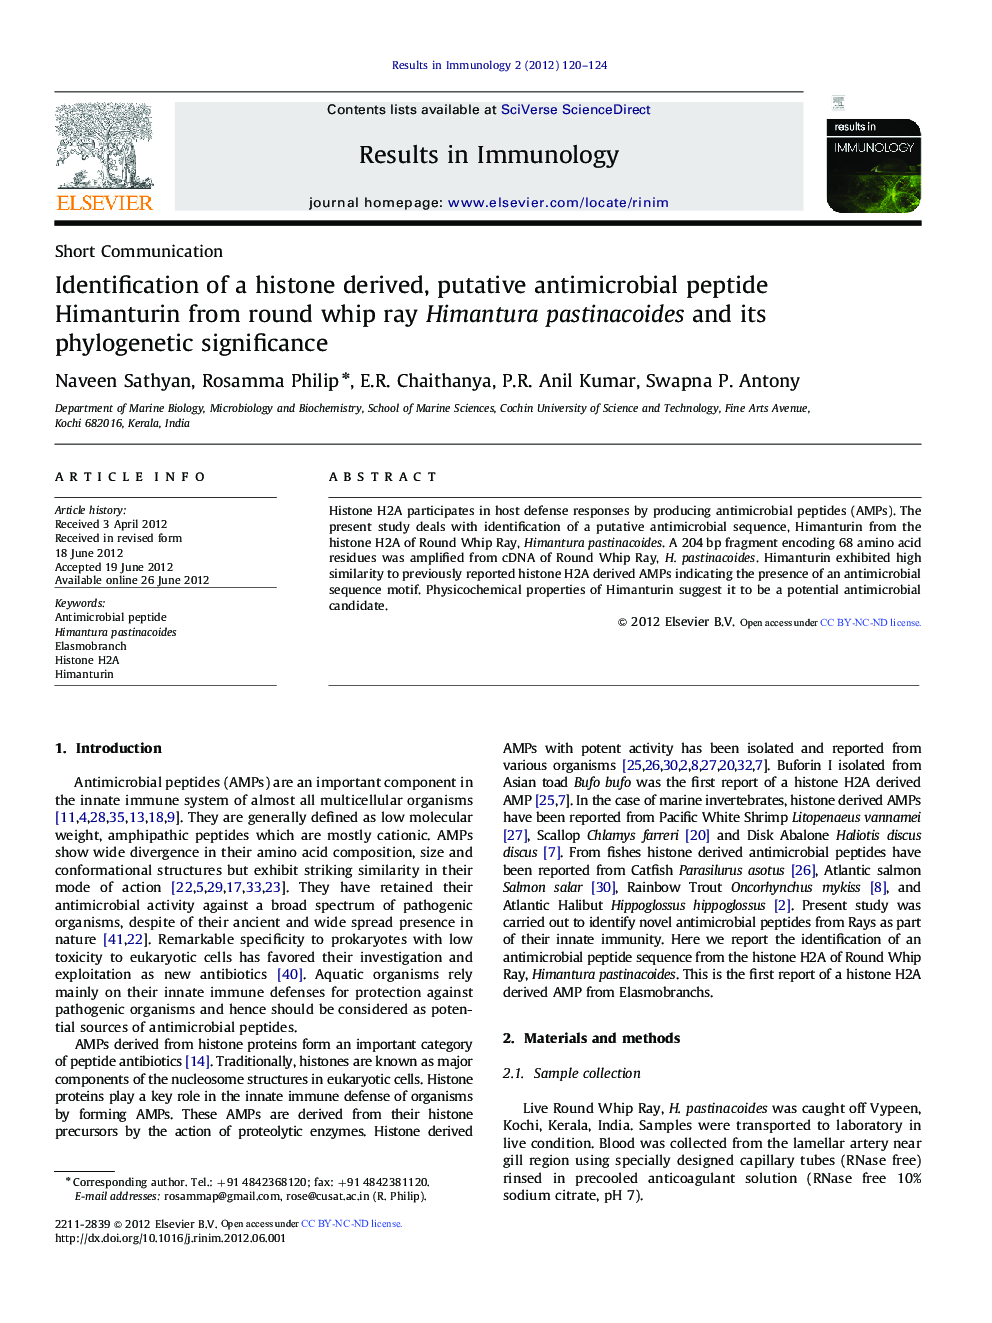 Identification of a histone derived, putative antimicrobial peptide Himanturin from round whip ray Himantura pastinacoides and its phylogenetic significance